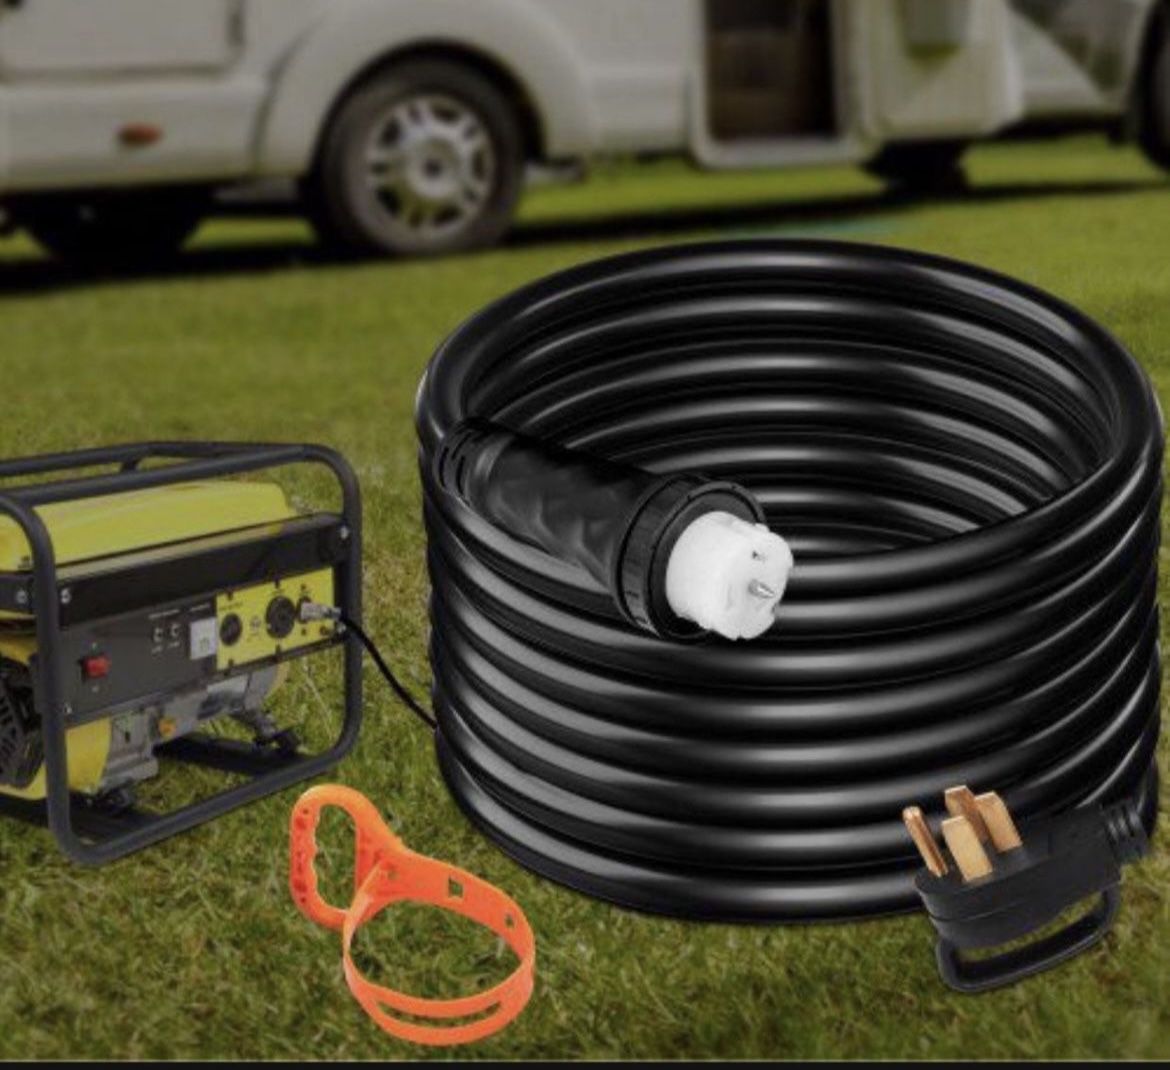 Generator Extension Cord 10ft 50 Amp, Generator Cord. Power Cord. $40.00 FIRM!!